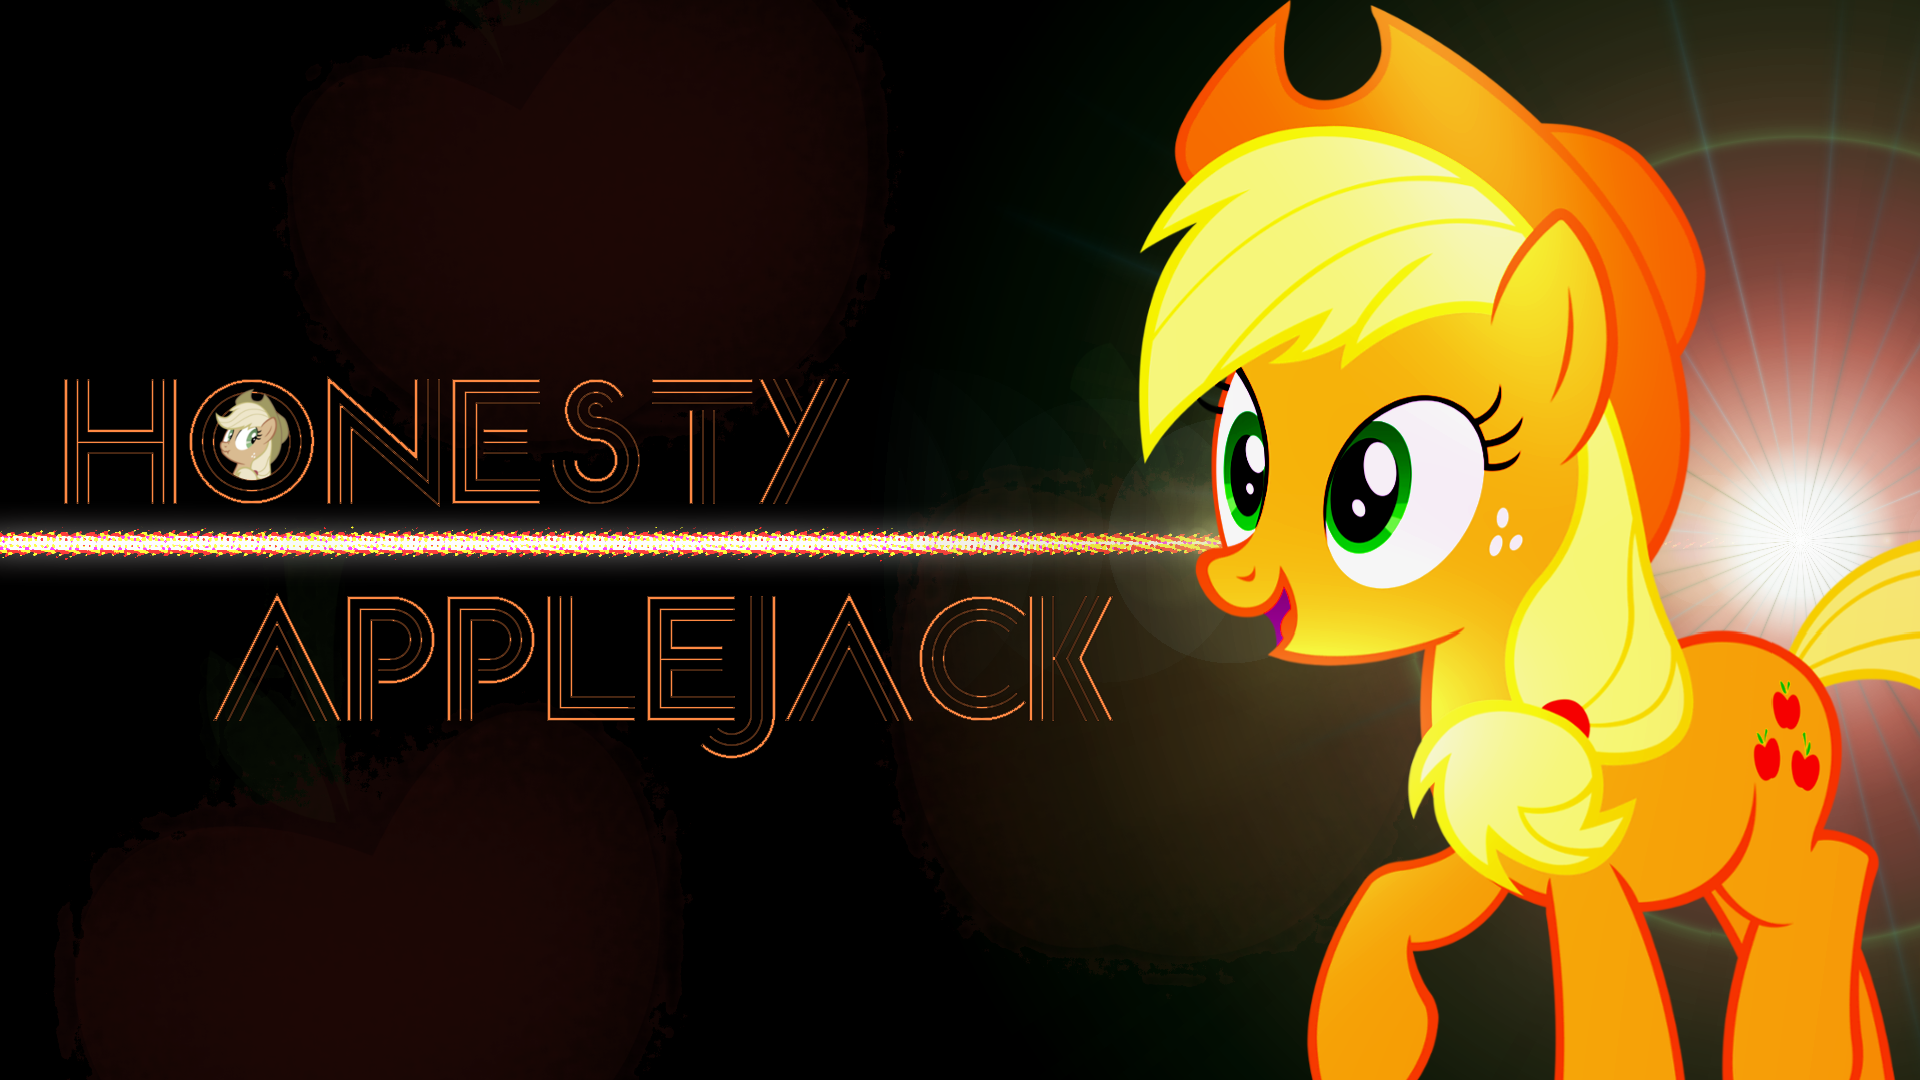 Shiny-shiny pretty lights wallpaper pack. by BlackGryph0n, Clueless313, Felix-KoT and Qsteel